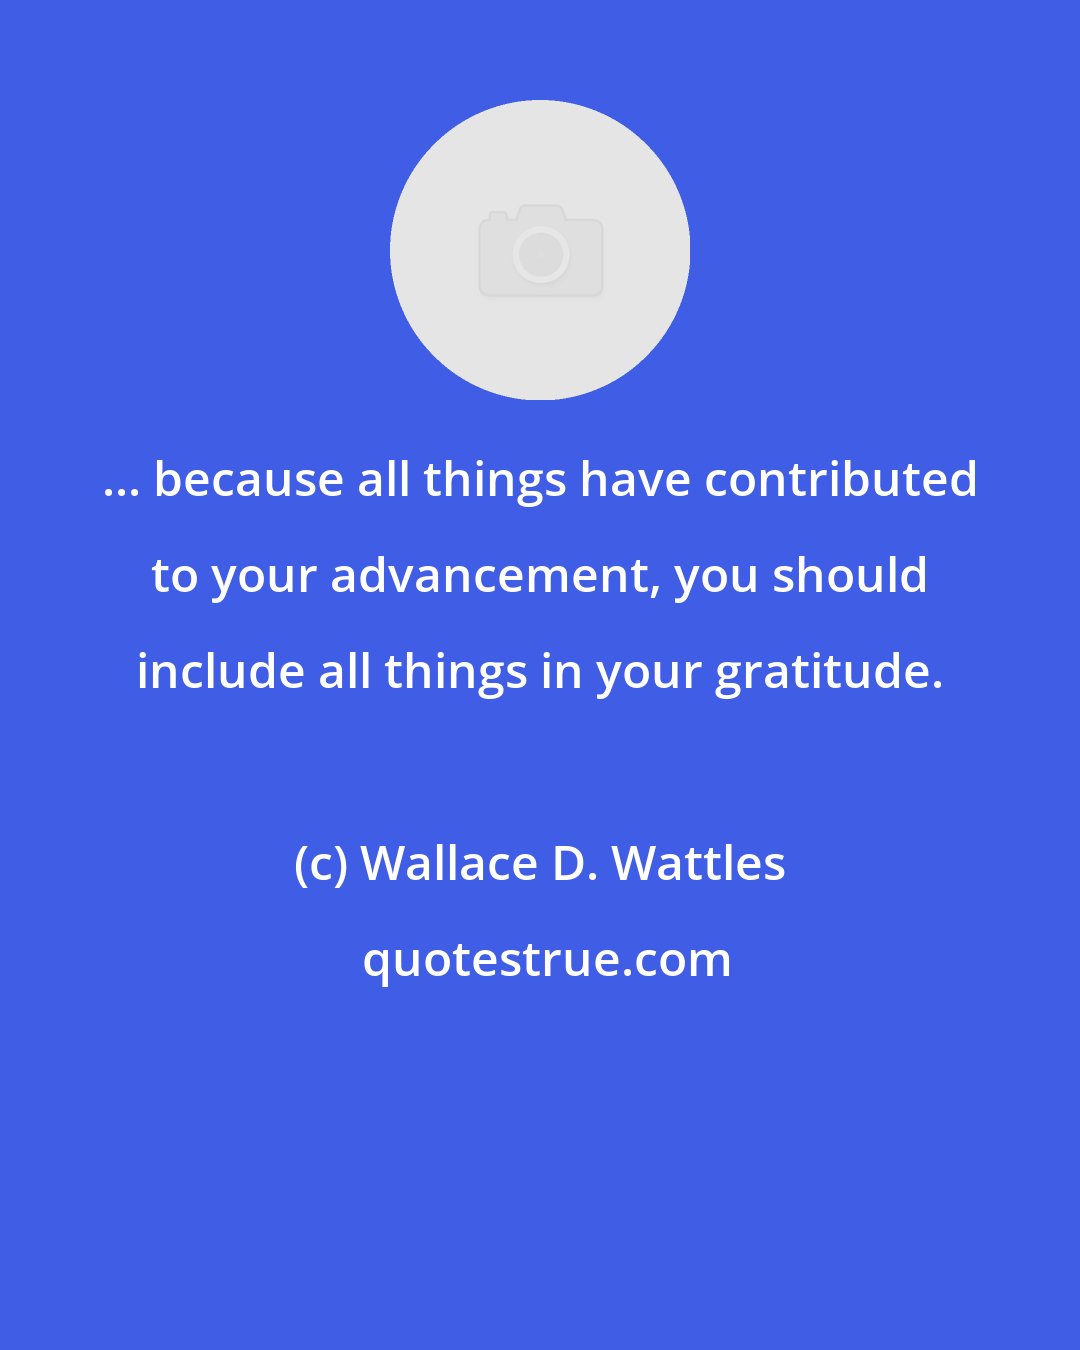 Wallace D. Wattles: ... because all things have contributed to your advancement, you should include all things in your gratitude.